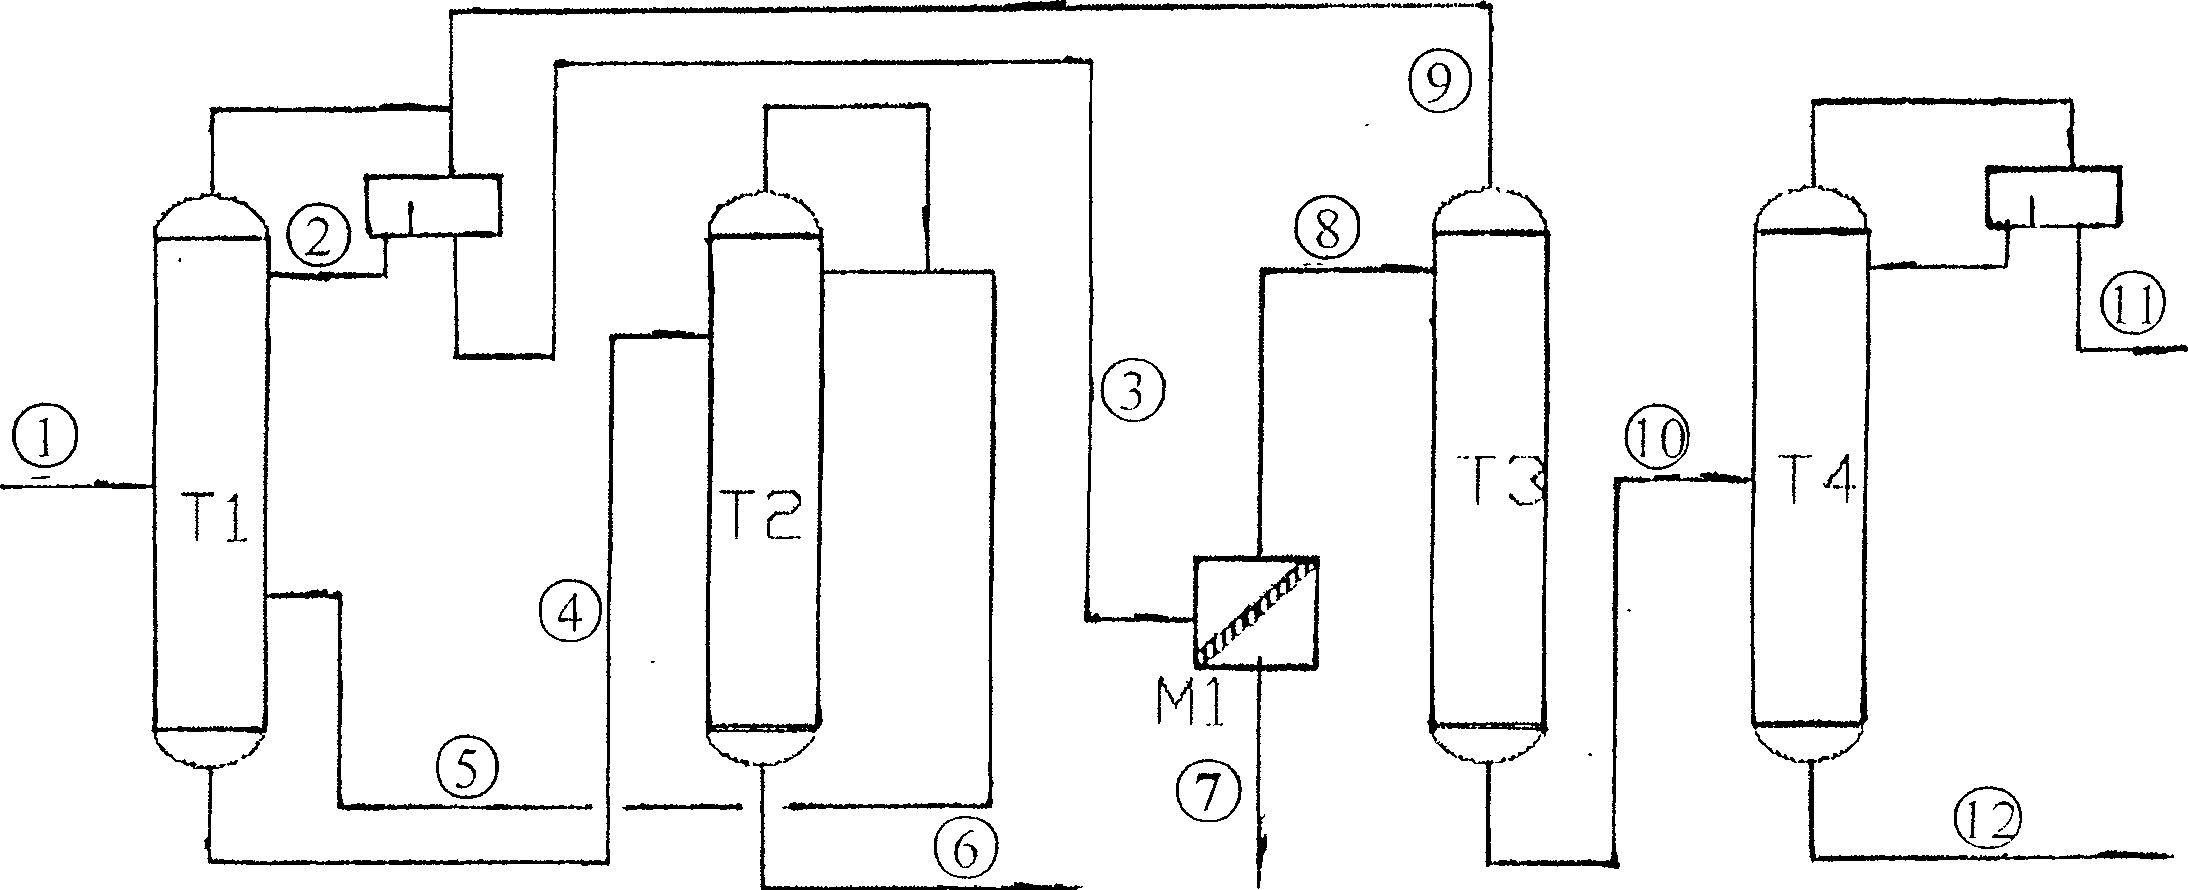 Process for crylic acid azeotropism refining and recovering acetic acid